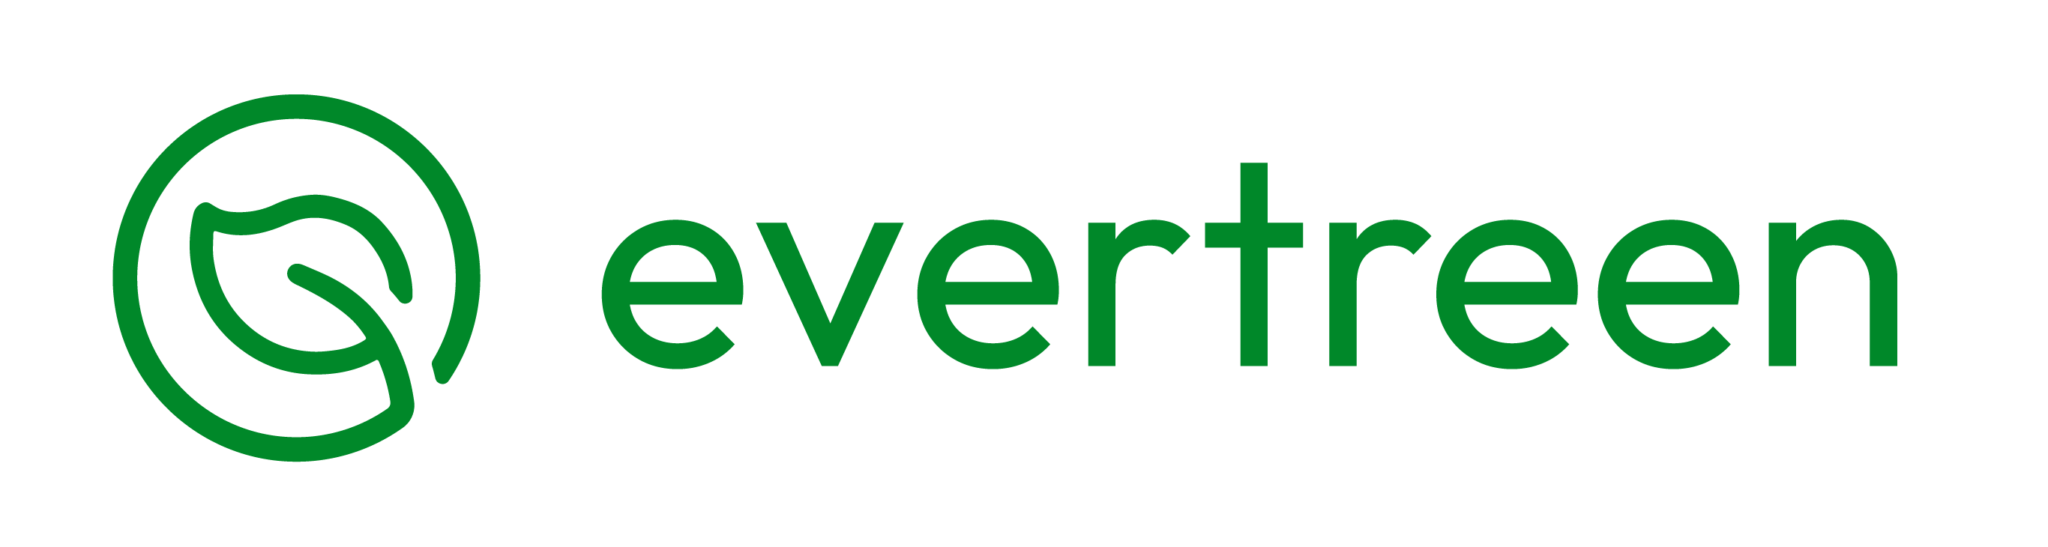 logo for evergreen, a green leaf and then green text